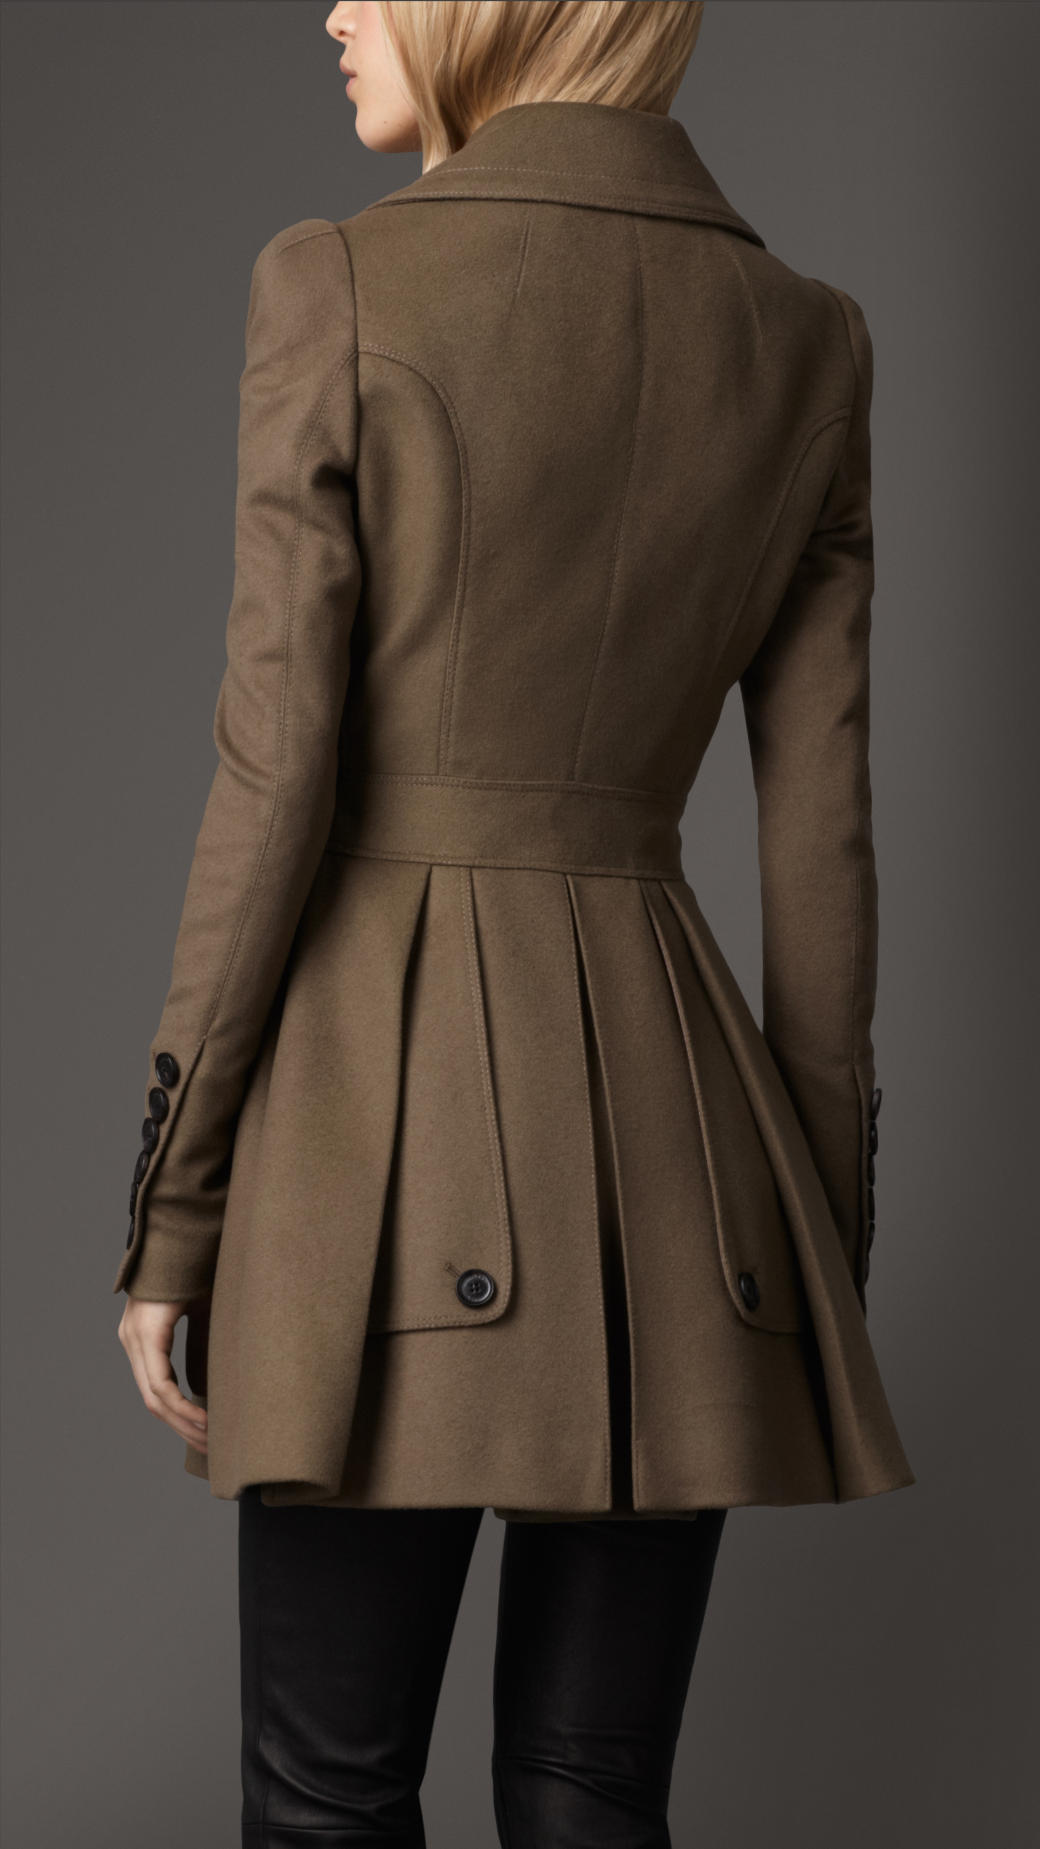 Lyst - Burberry Fitted Wool Cashmere Pea Coat in Brown